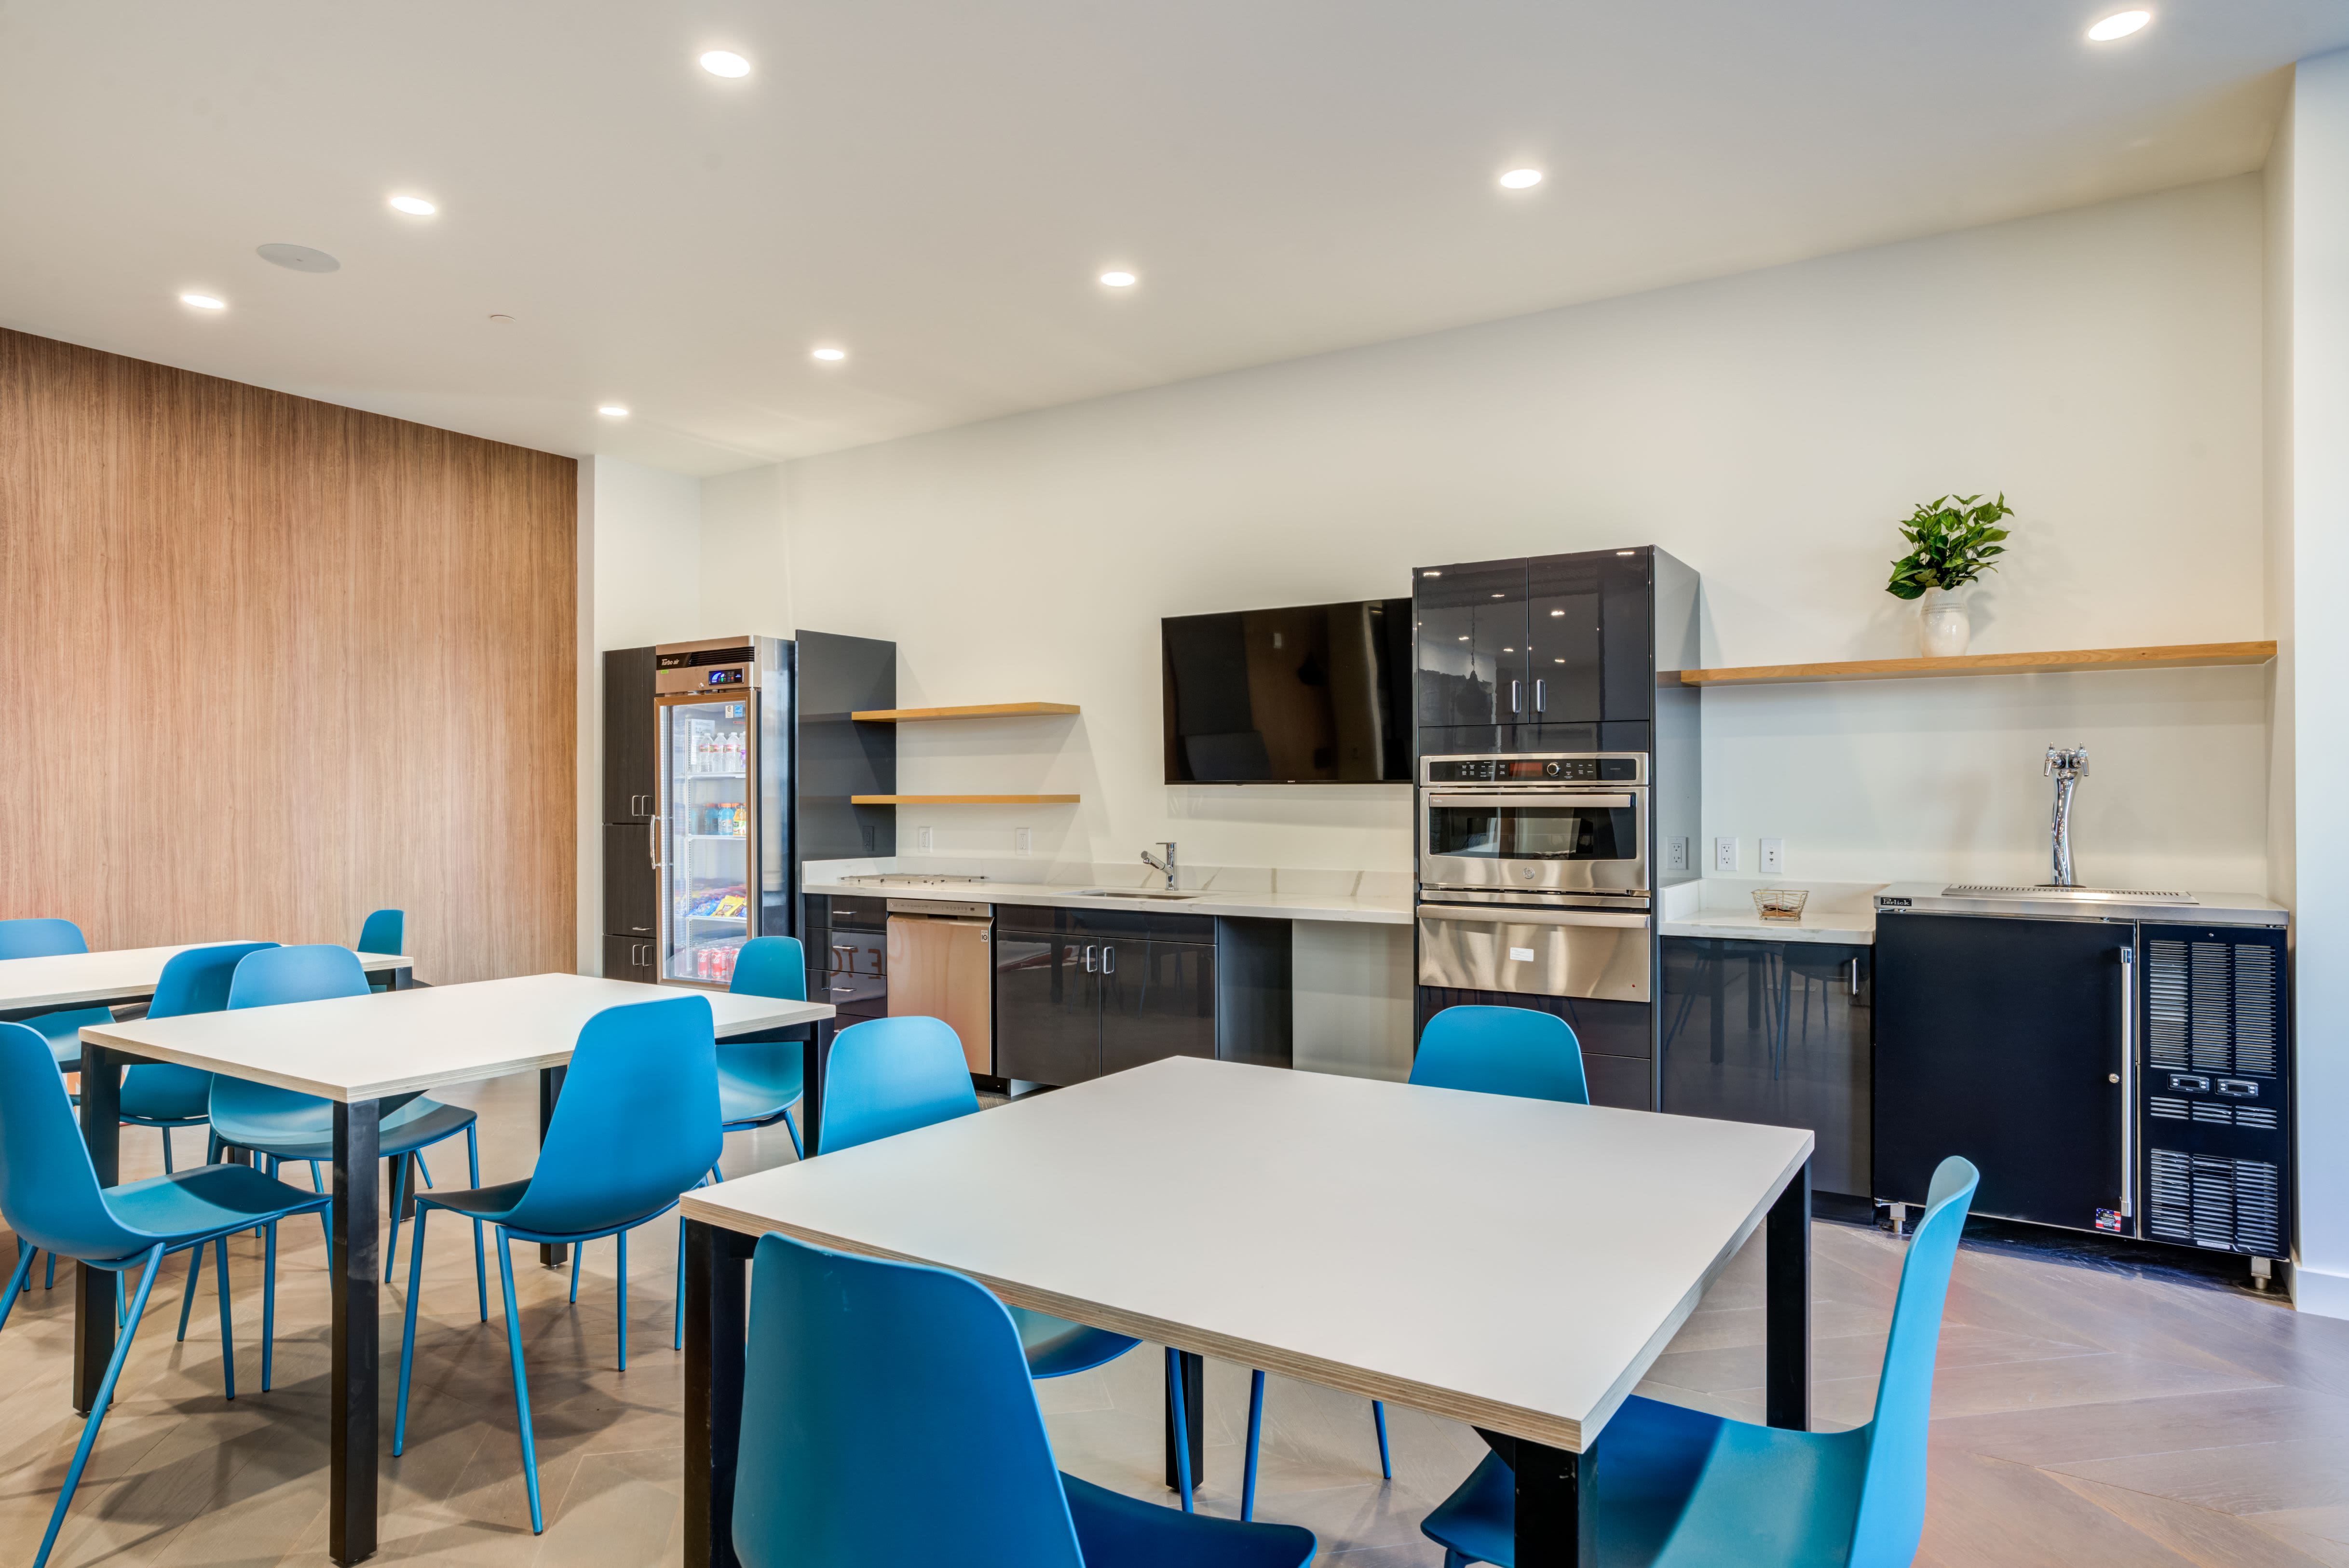 Community kitchen for residents at The Quarry in Hillsboro, Oregon